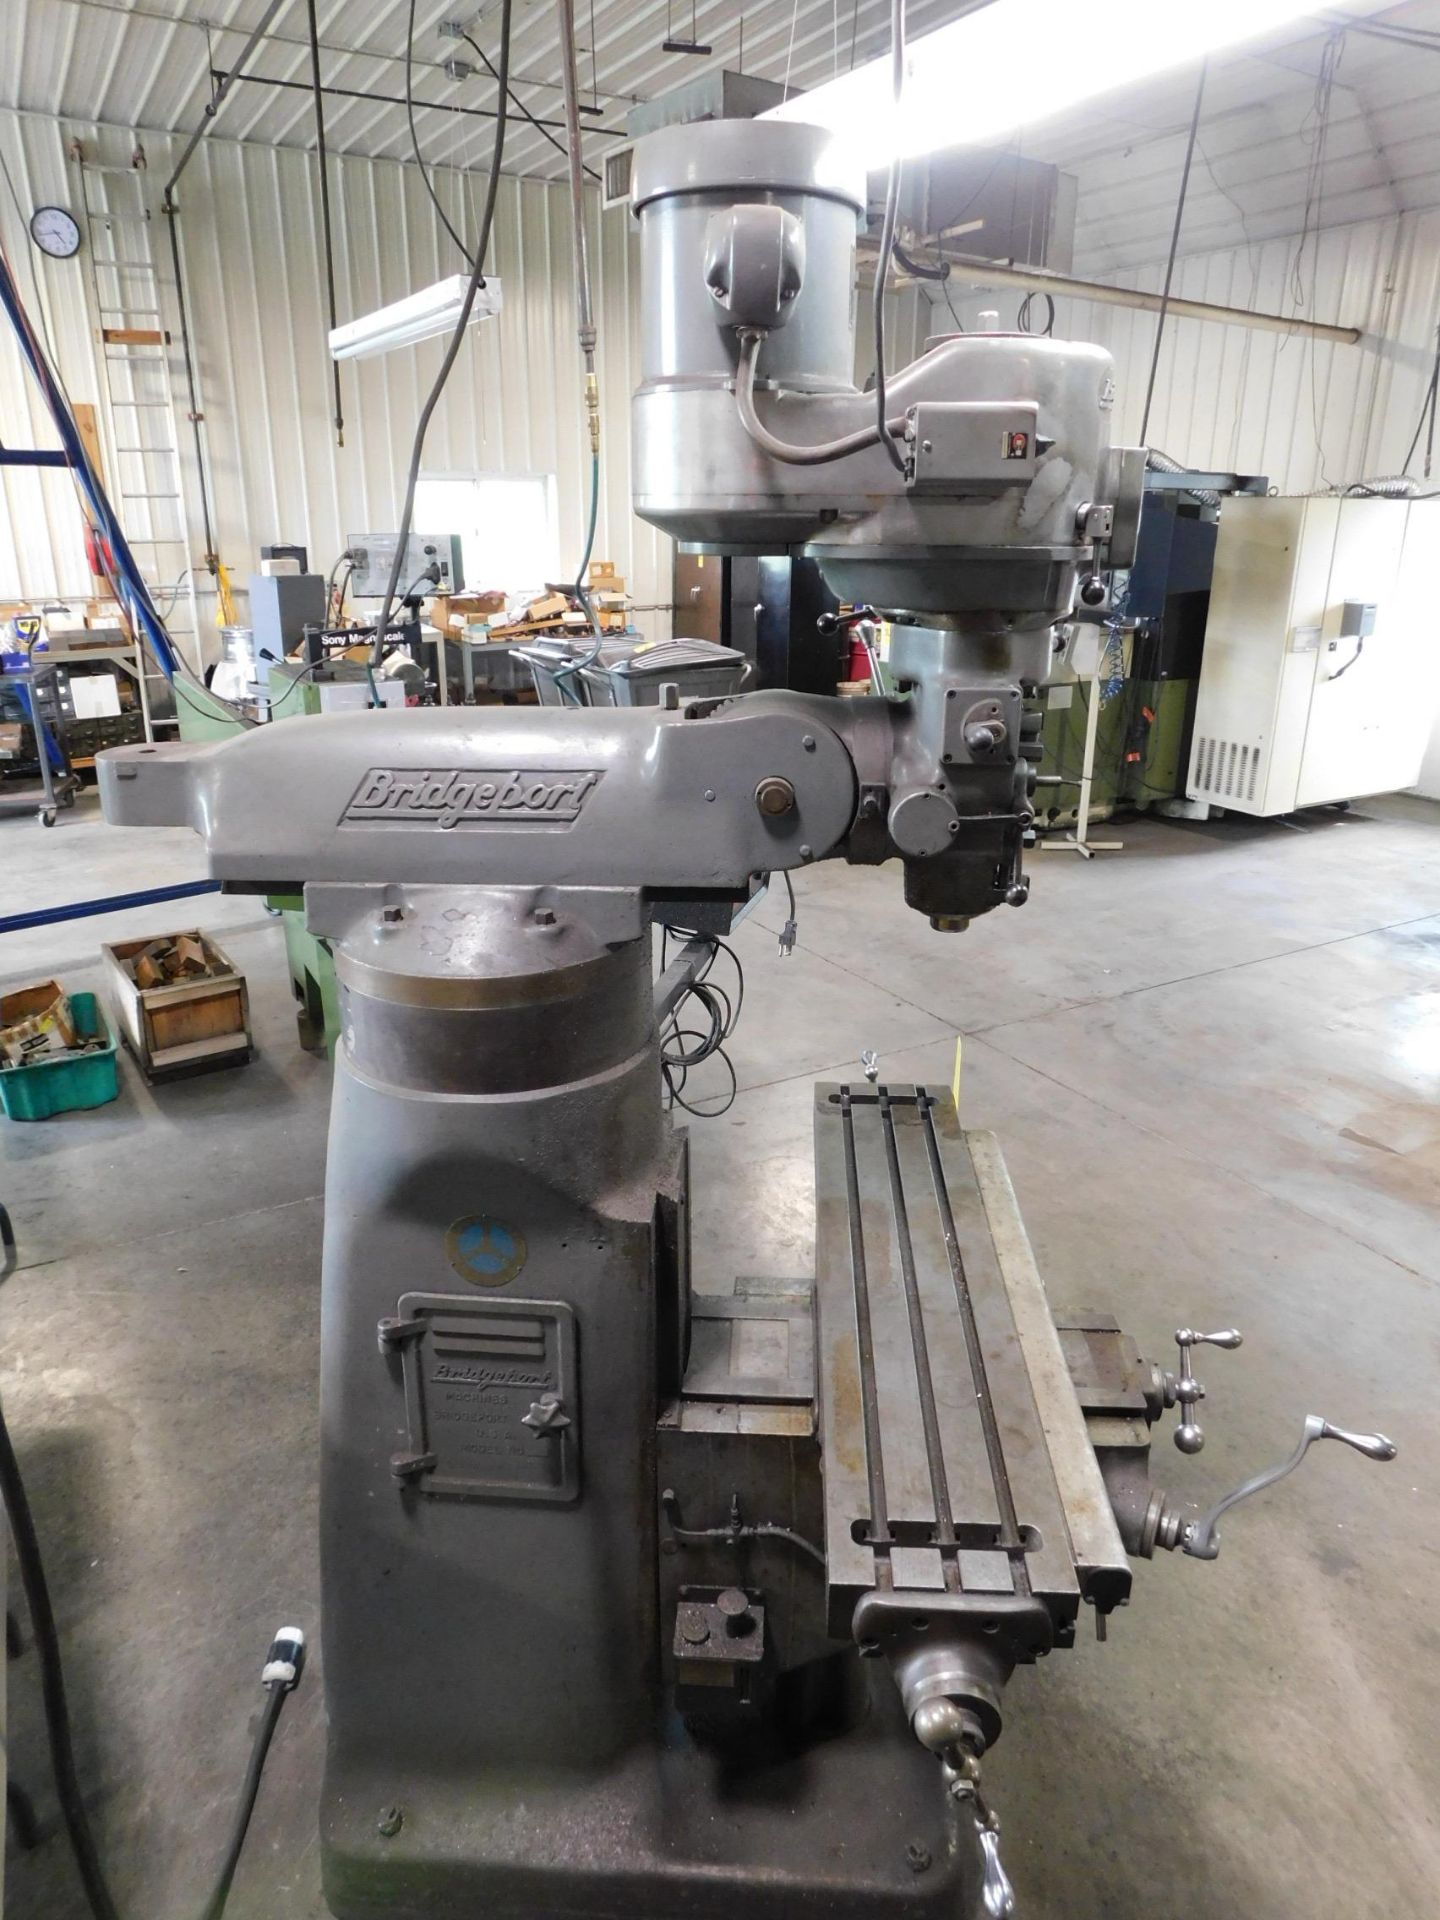 Bridgeport 1 1/2 H.P. Variable Speed Vertical Mill sn#12BR143491,9"X42" Table, 4"Riser Block, Amilam - Image 8 of 10